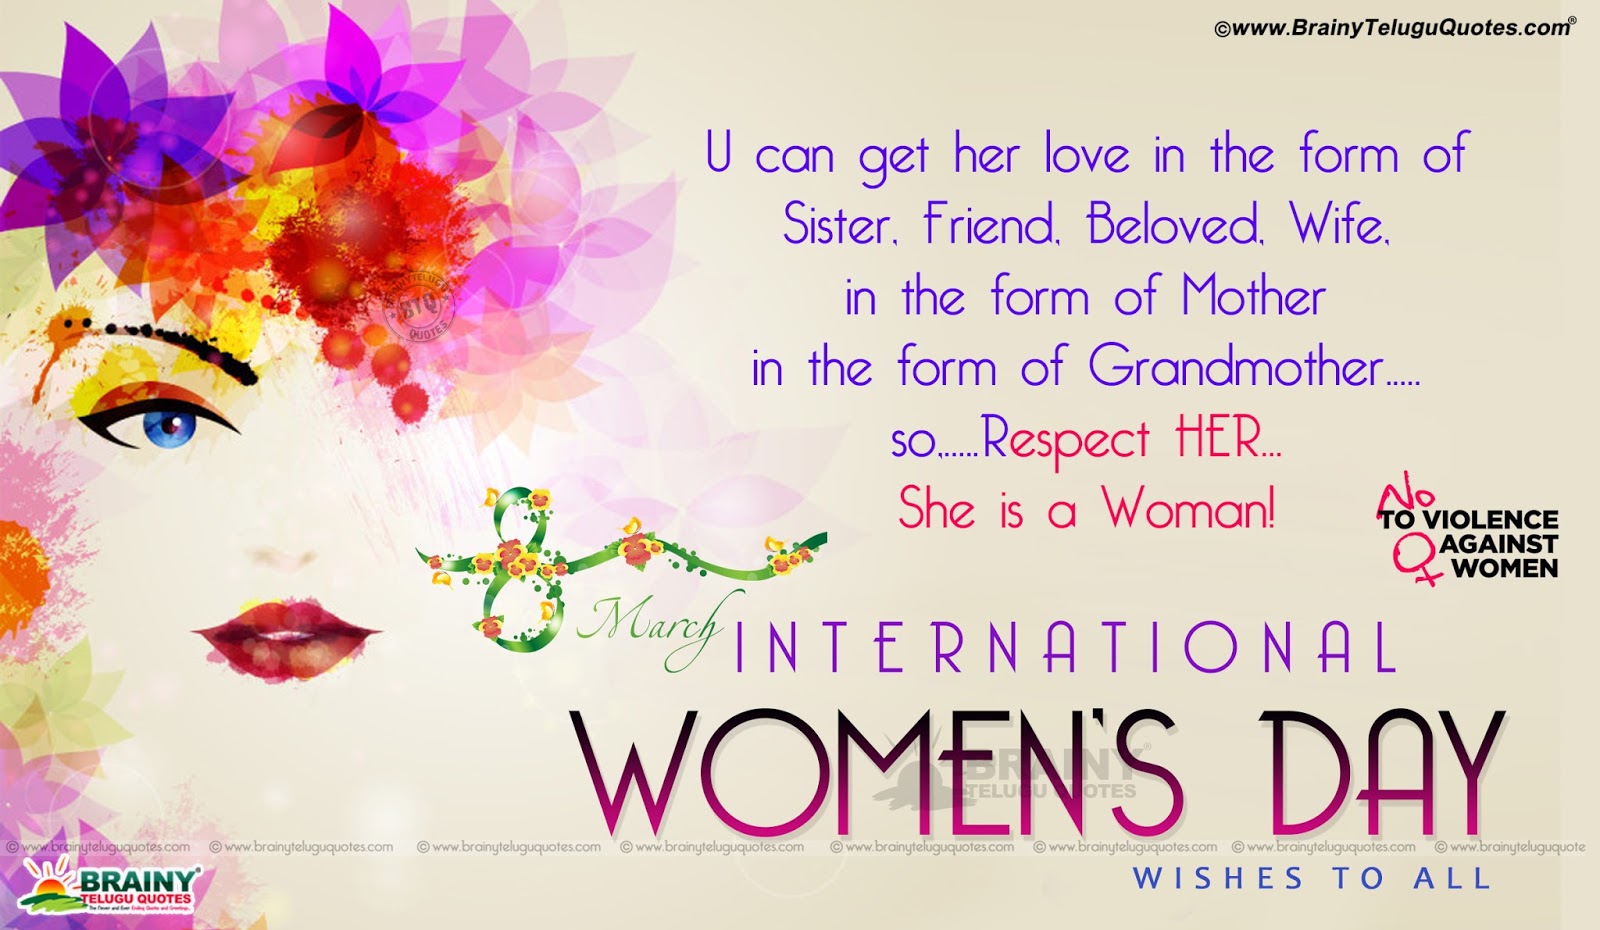 March 8th International Women's Day Greetings in English